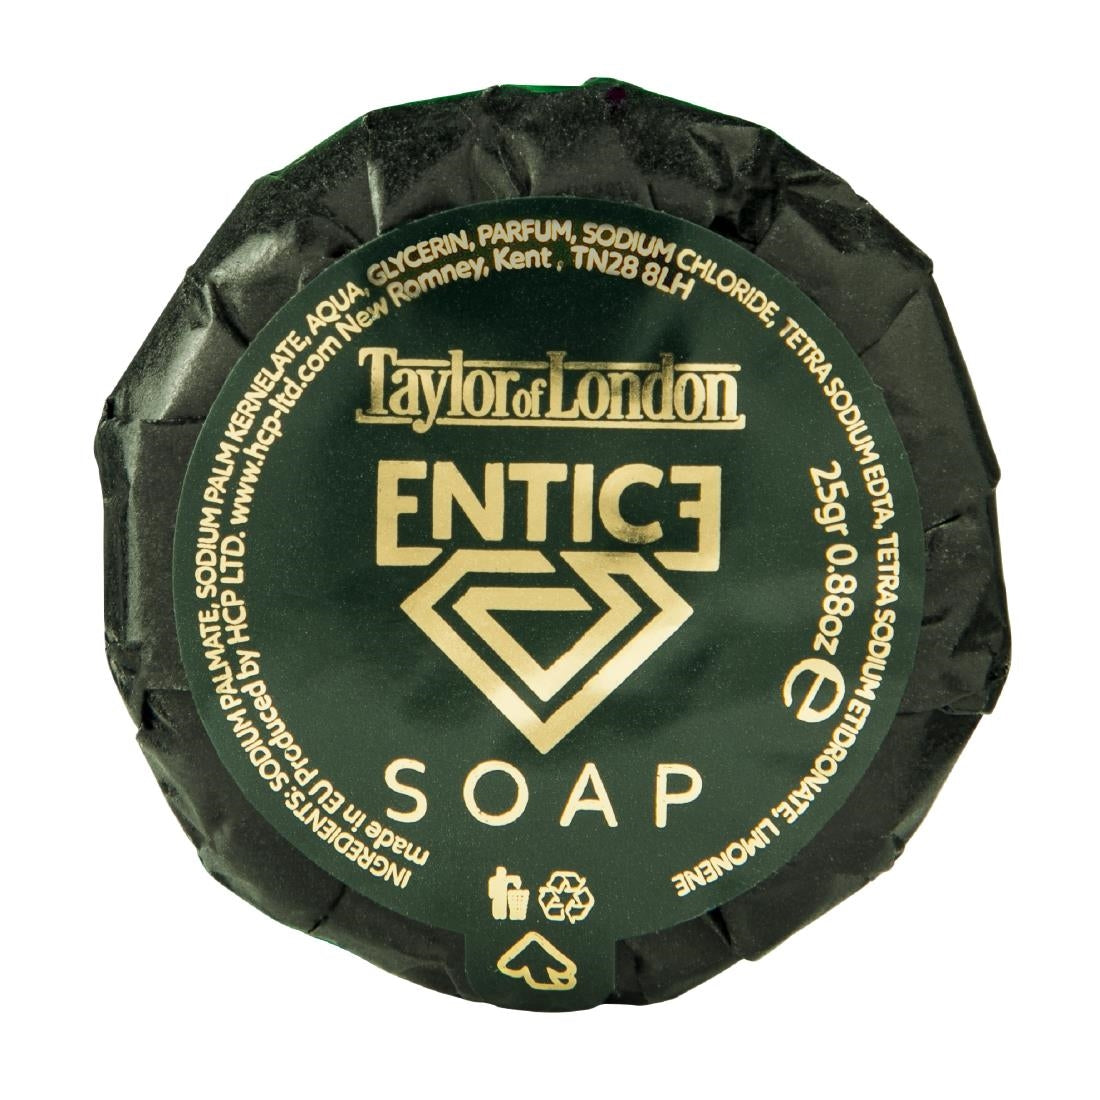 CU233 Taylor of London Entice Pleated Soap 25g (Pack of 100) JD Catering Equipment Solutions Ltd